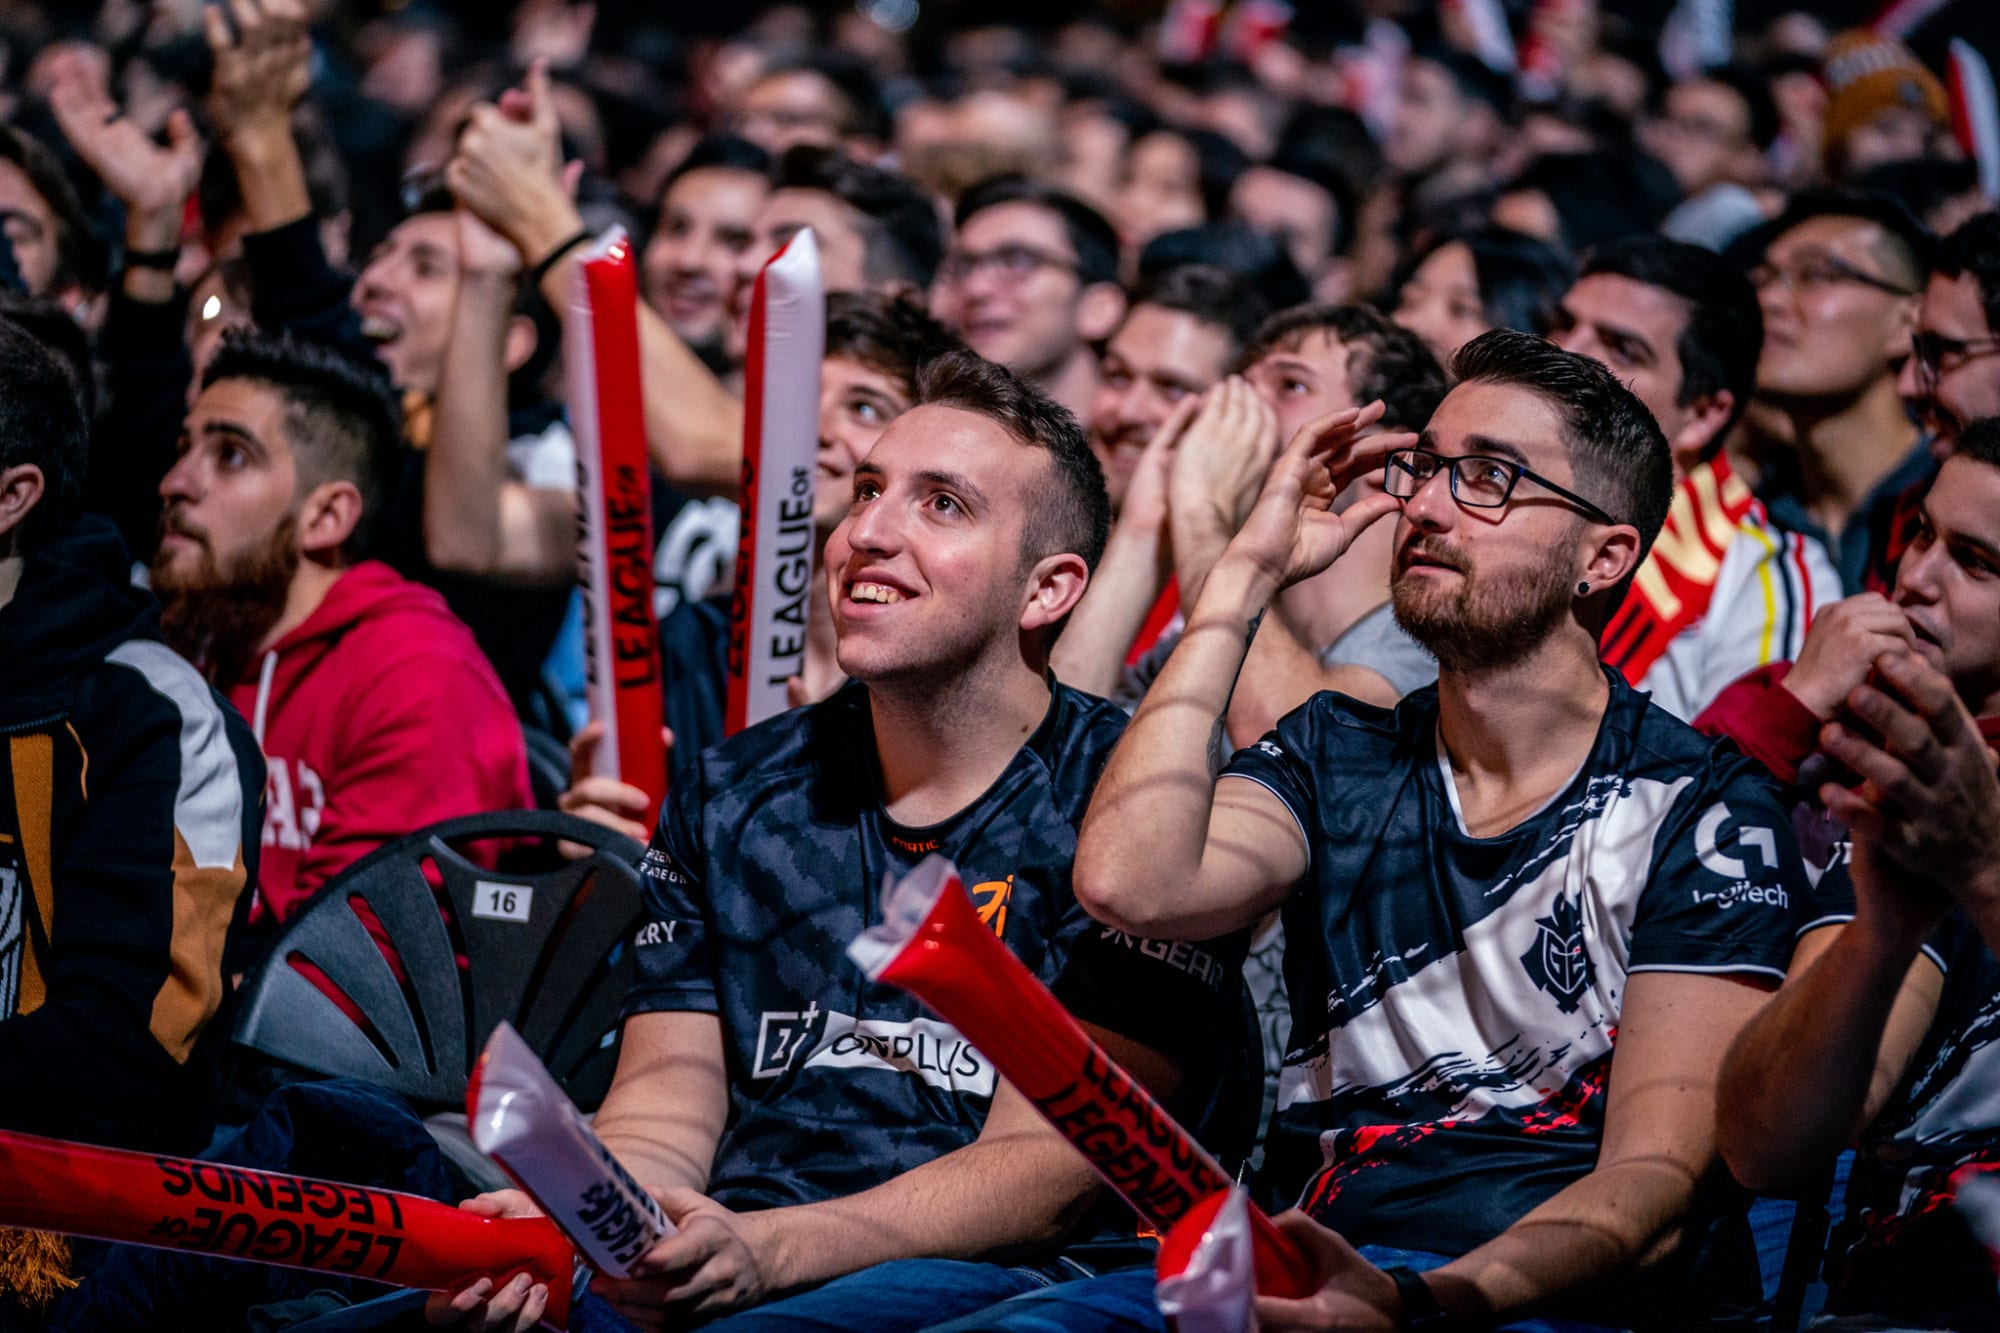 League of Legends Worlds 2021: Everything you need to know